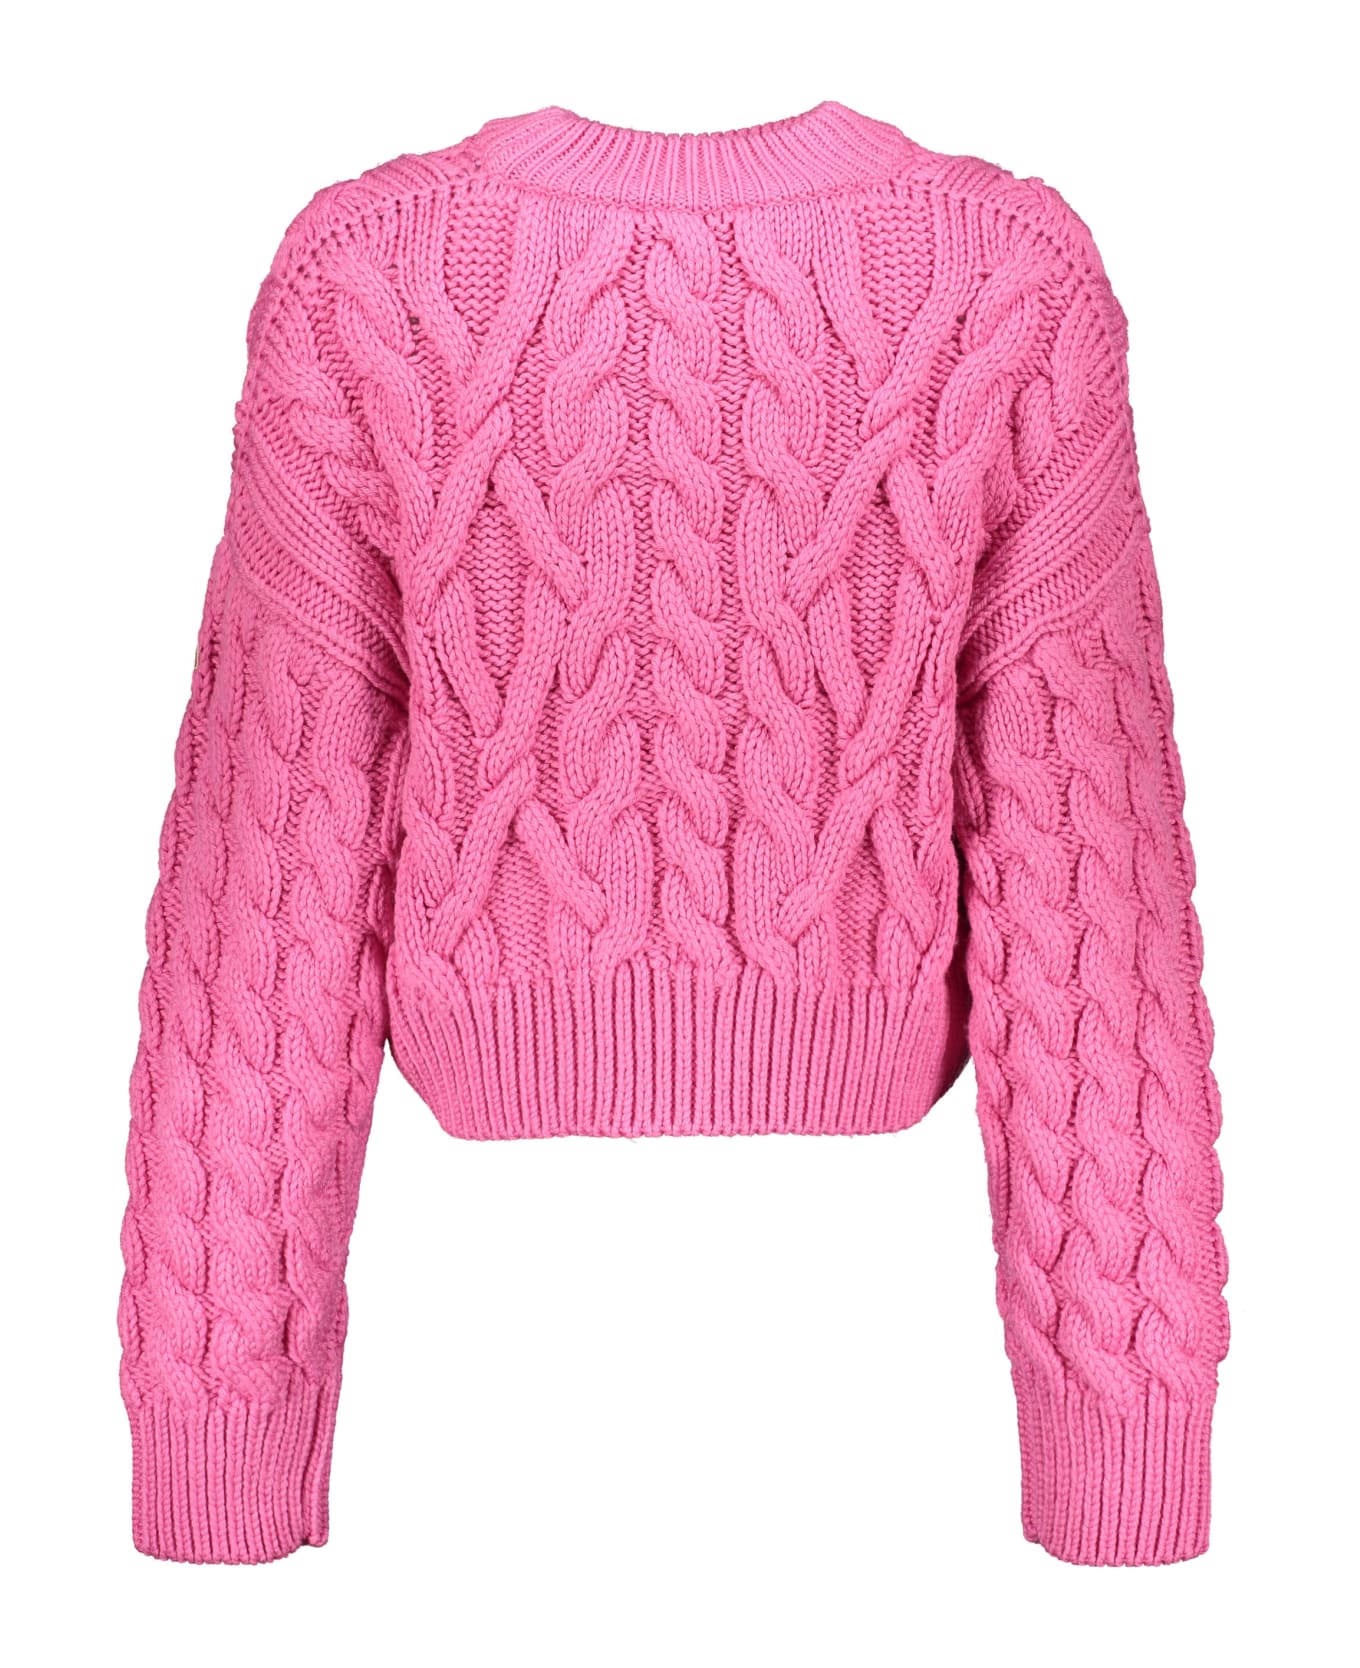 Moncler Grenoble Tricot-knit Wool Sweater - Pink ニットウェア